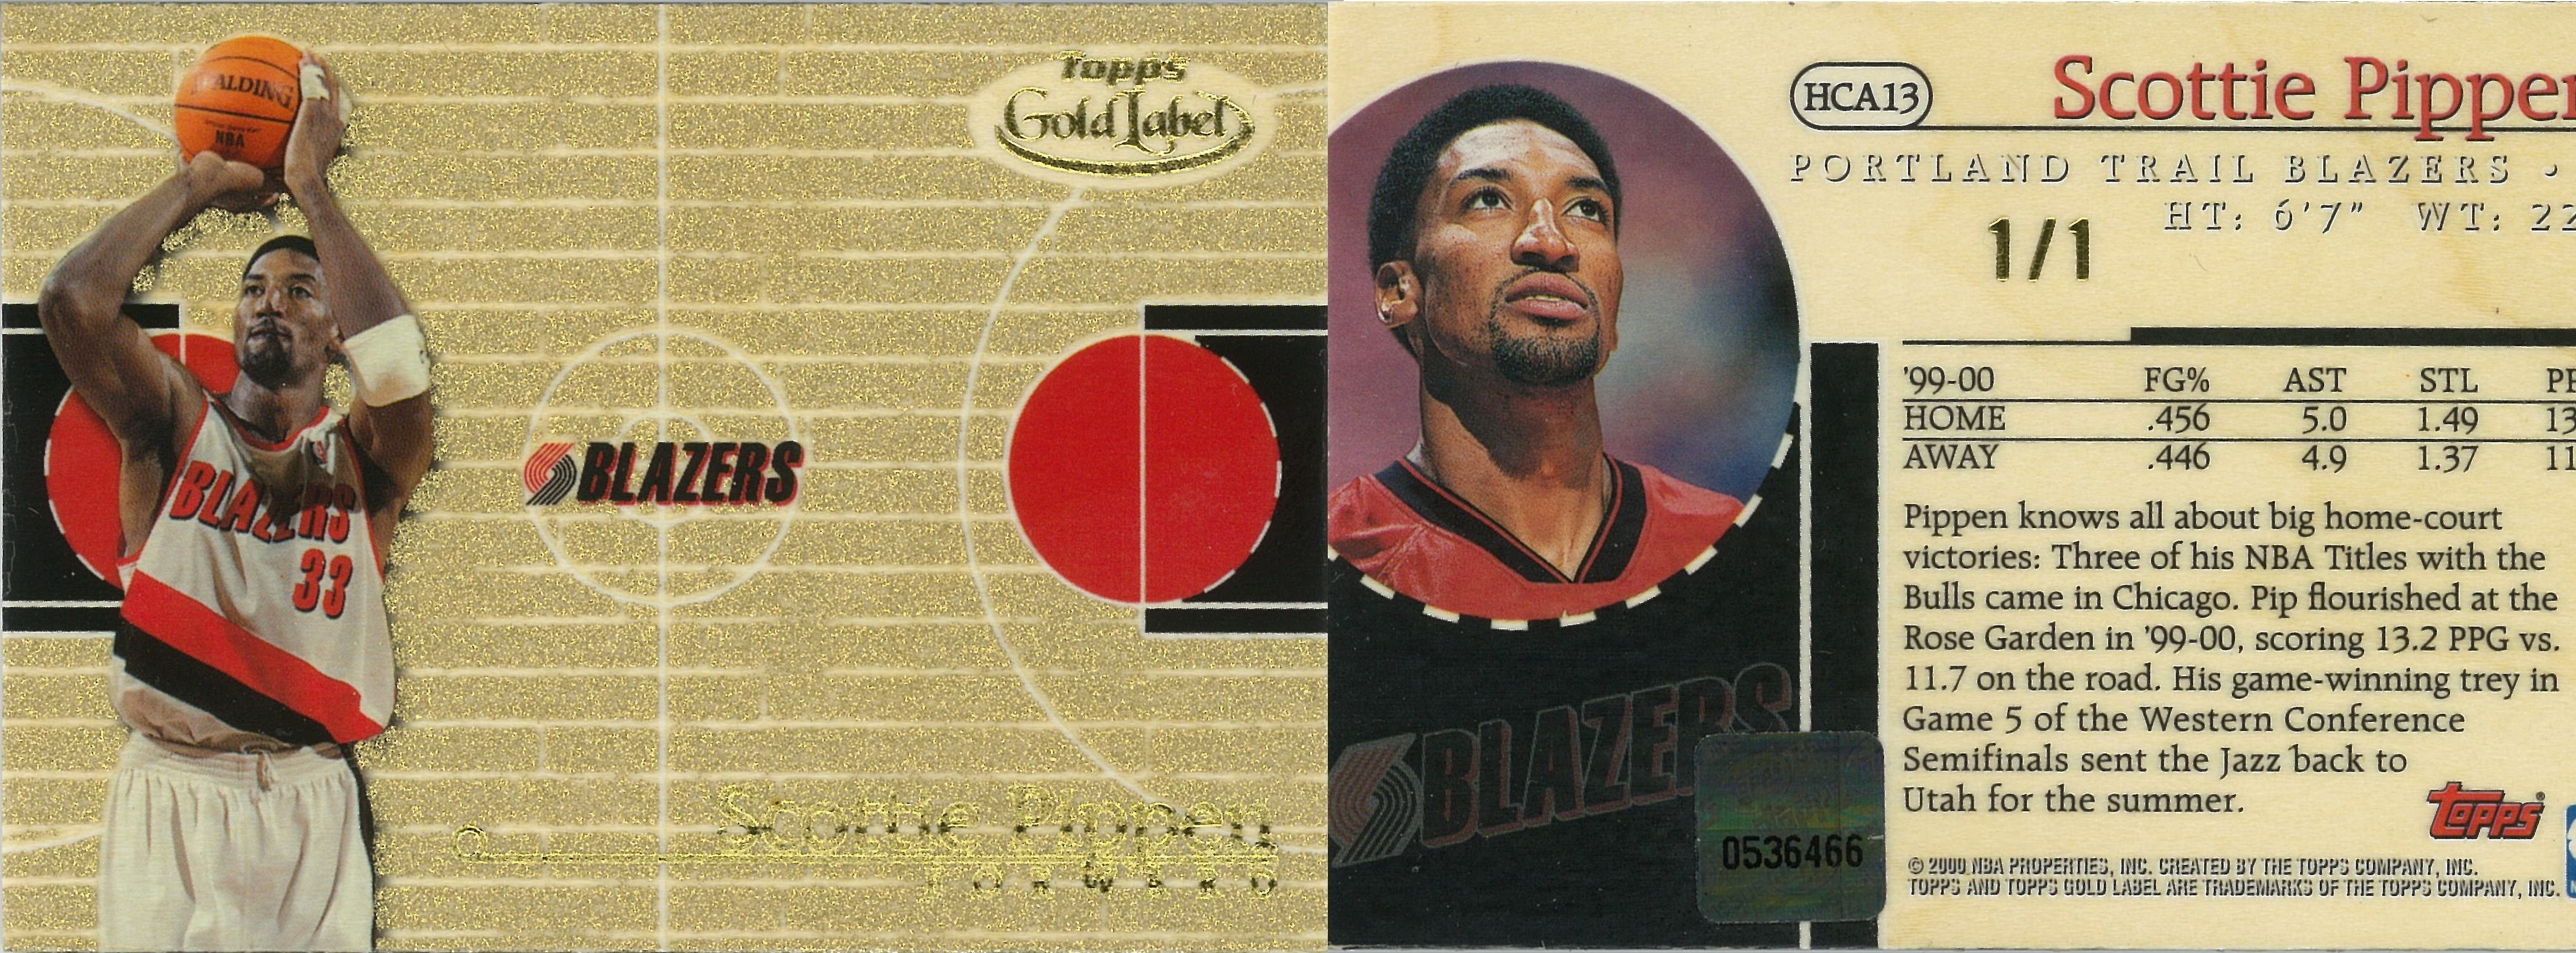 2000-01 Topps Gold Label Home Court Advantage One to One 1of1.jpg